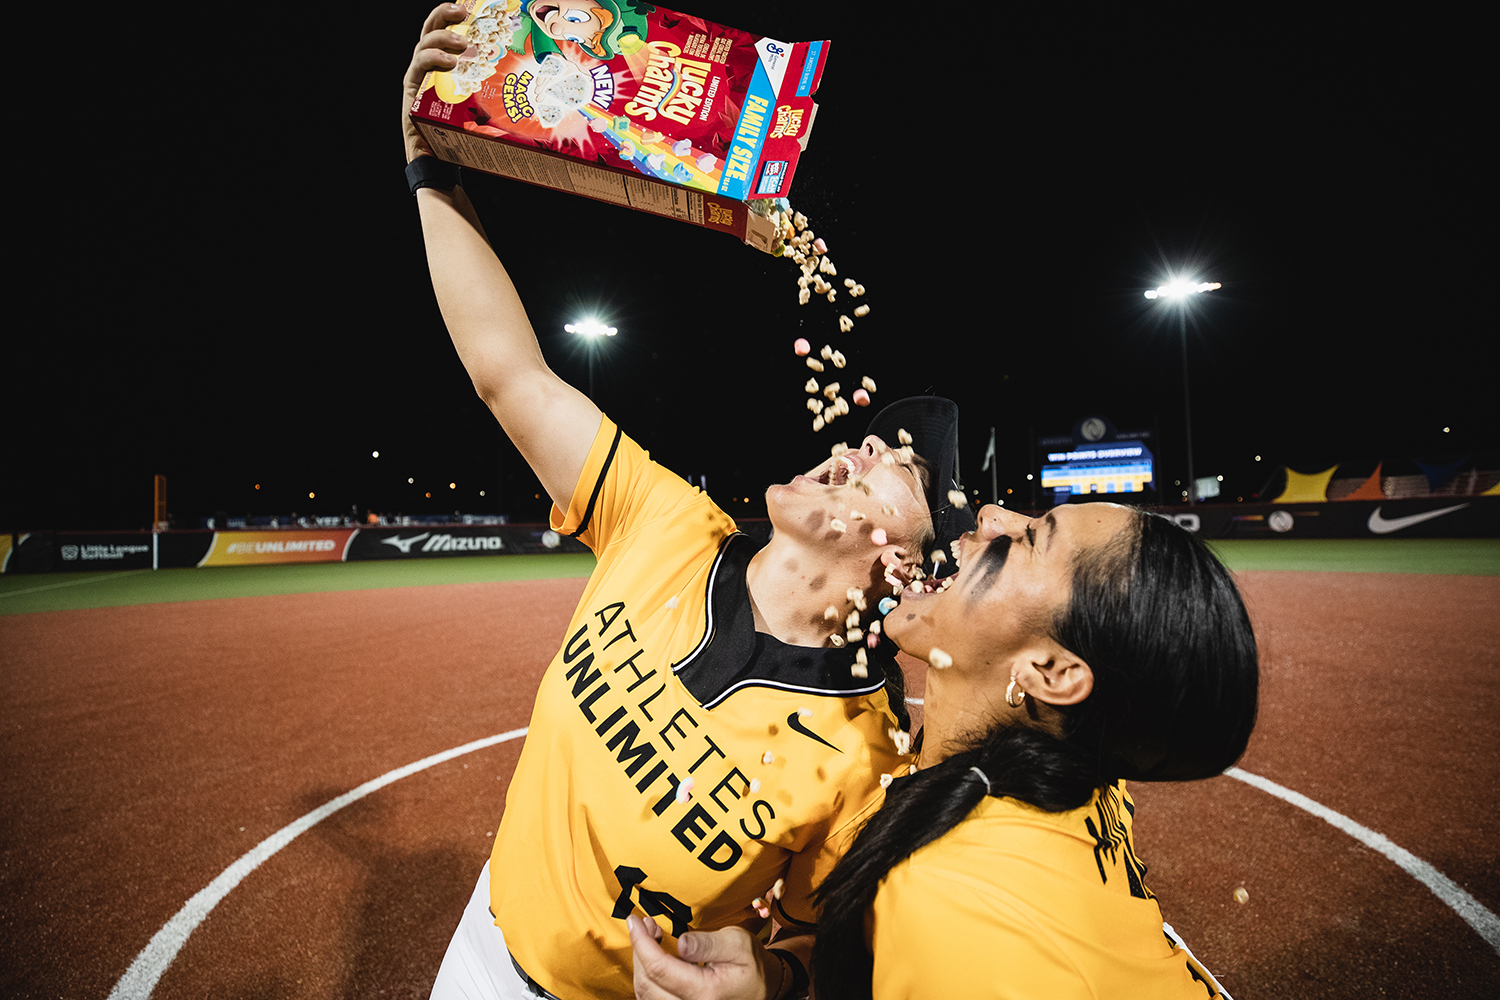 Dejah Mulipola and Hannah Flippen celebrate a home run with Lucky Charms.